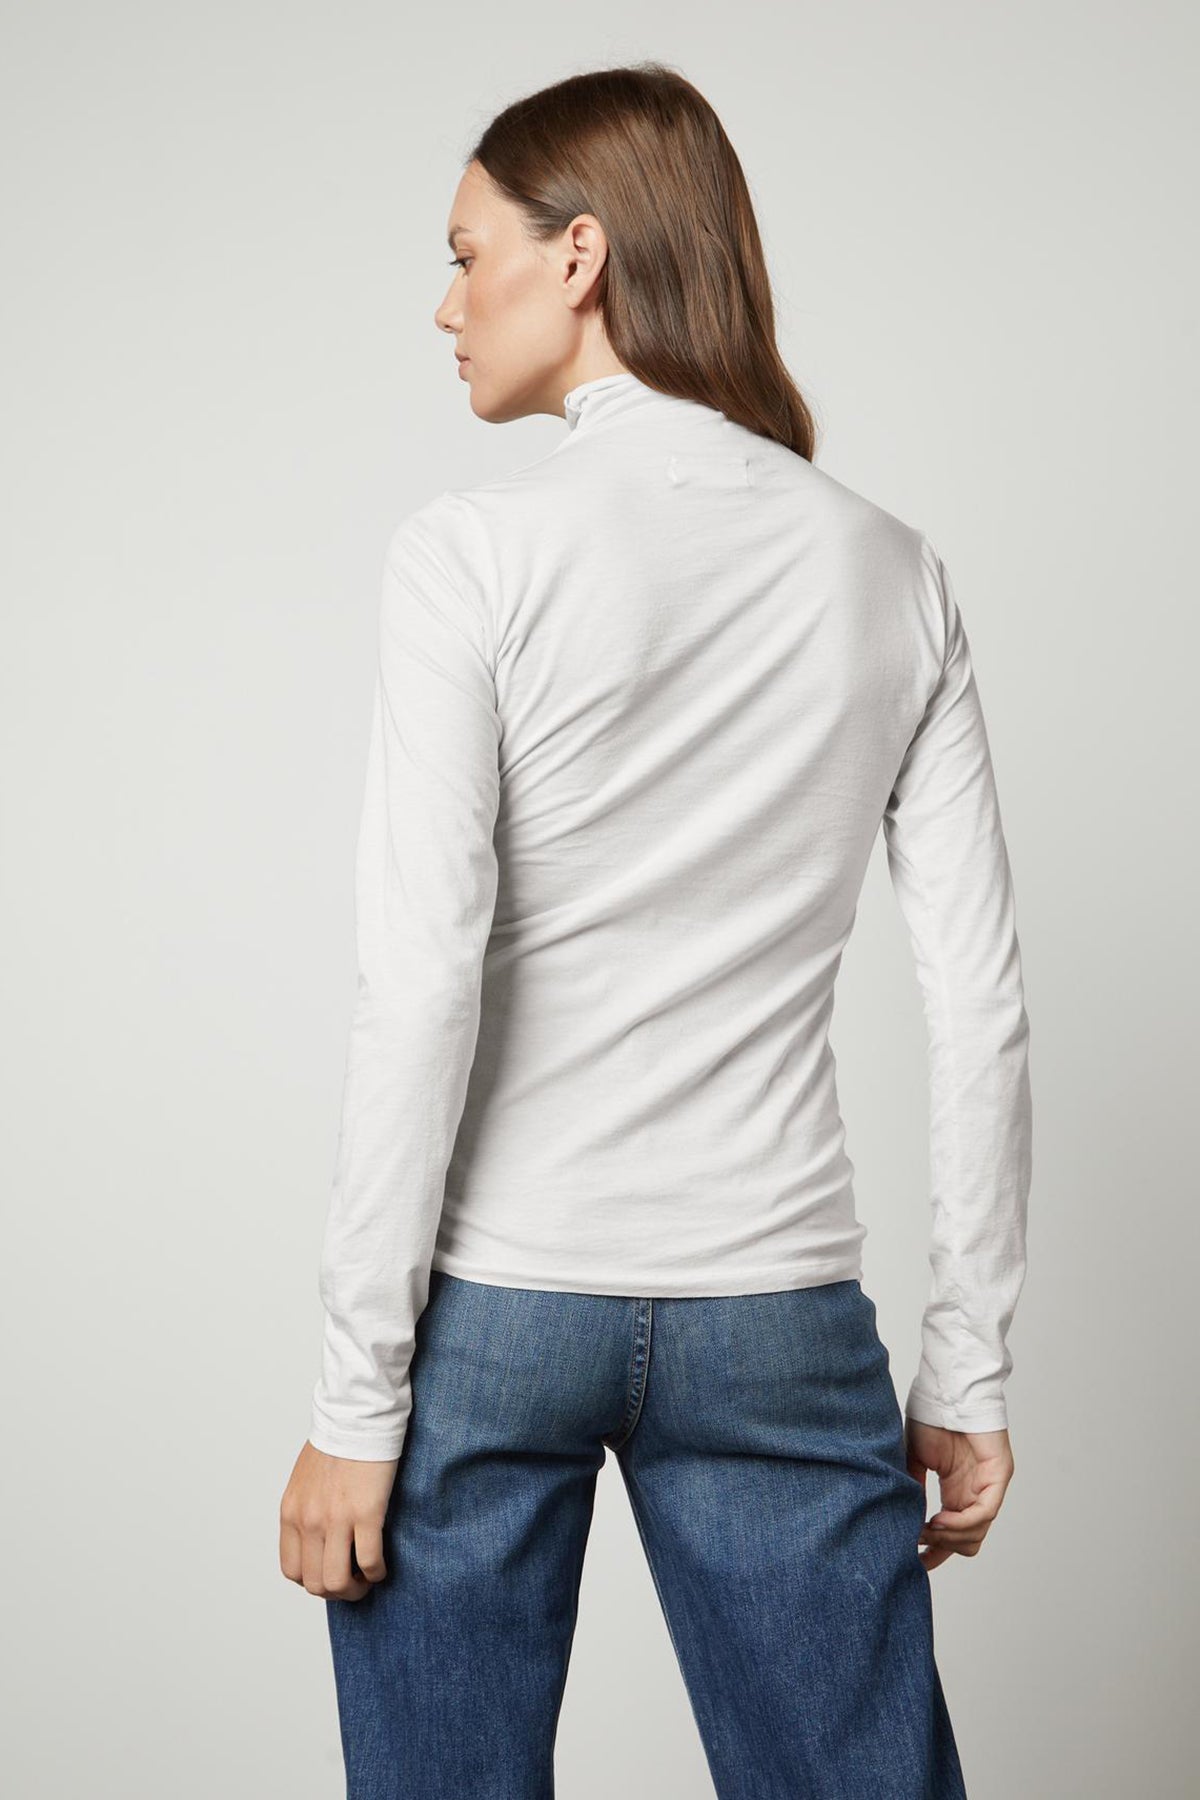 The versatile fashion world embraces the back view of a woman wearing Velvet by Graham & Spencer's TALISIA GAUZY WHISPER FITTED MOCK NECK TEE jeans and a white long-sleeved shirt.-26914940223681